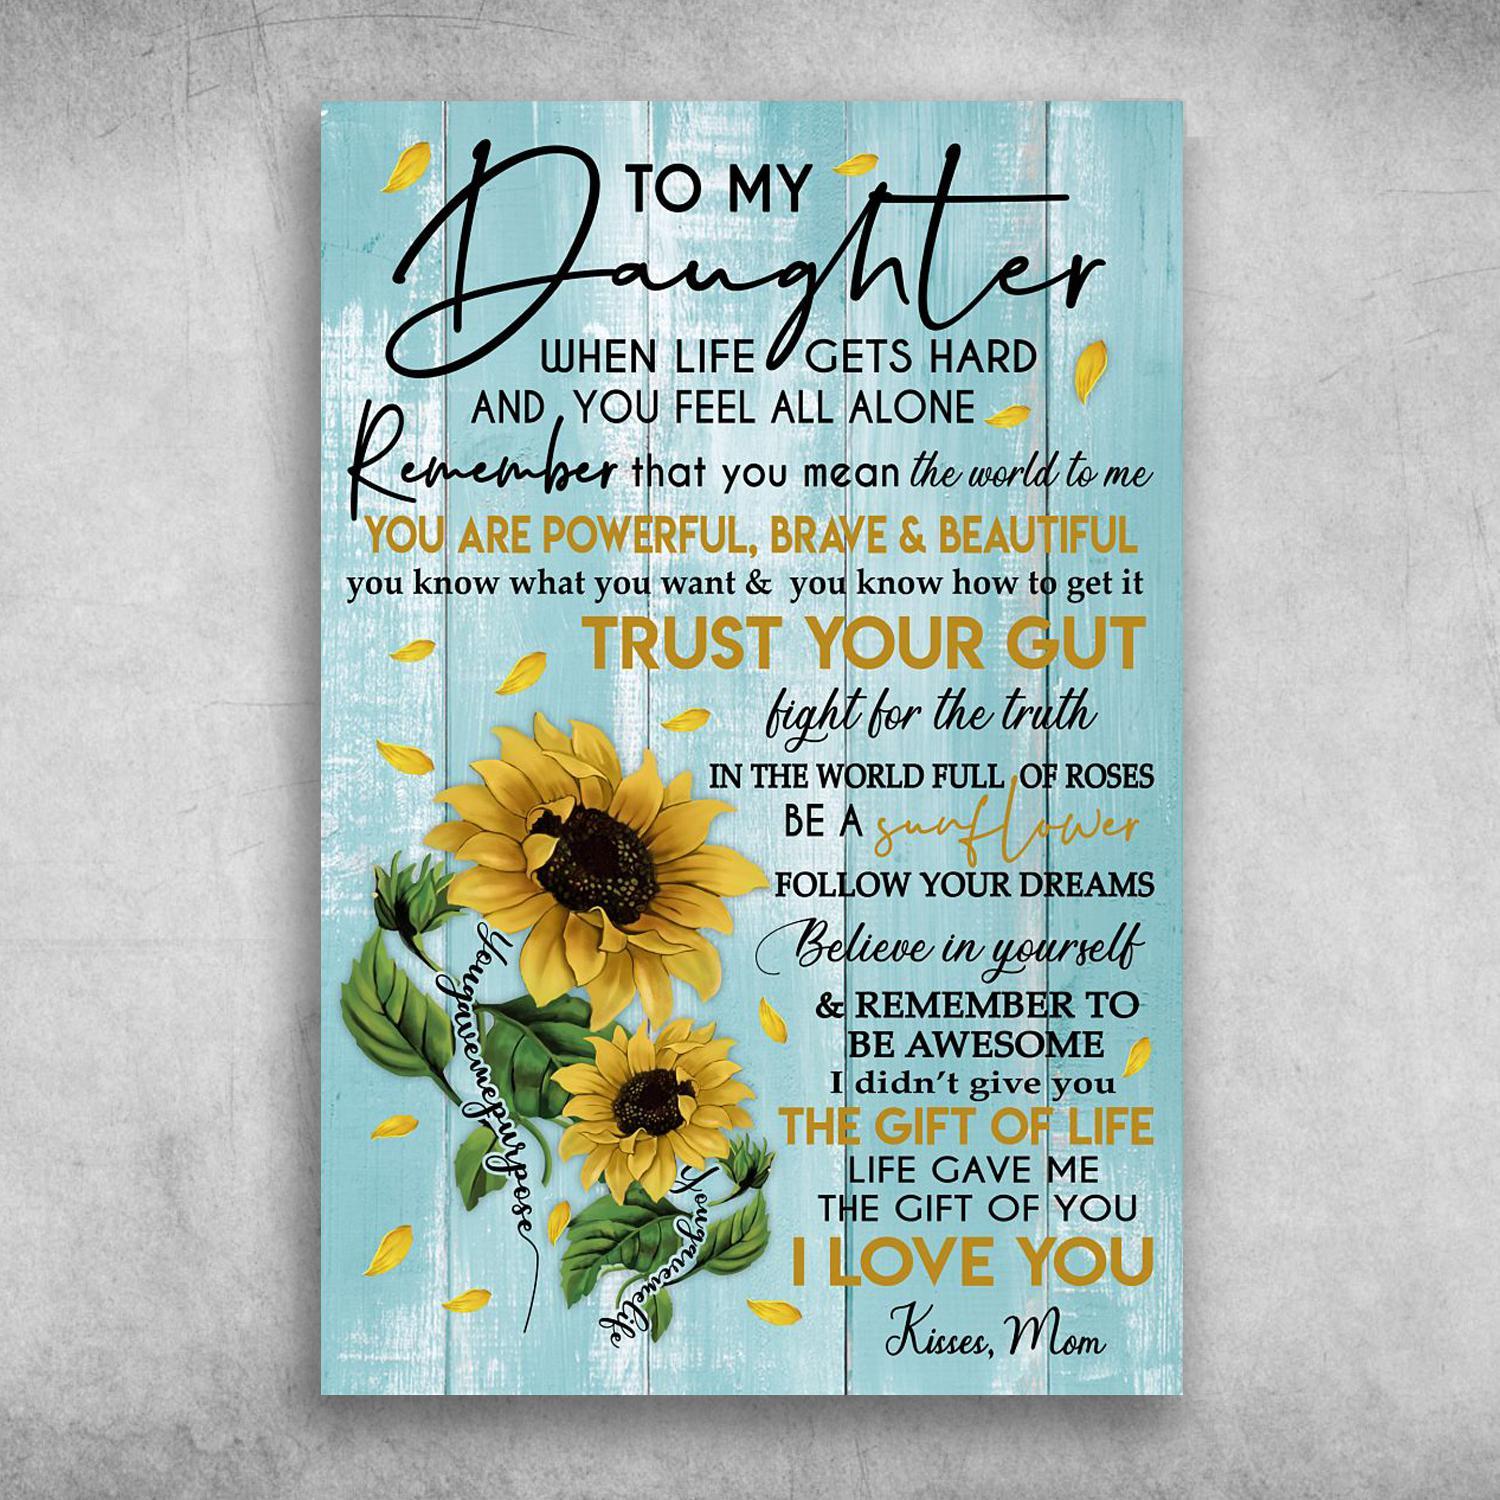 To My Daughter Life Gave Me The Gift Of You Kisses Mom Poster Print Wall Art Canvas Wall Decor